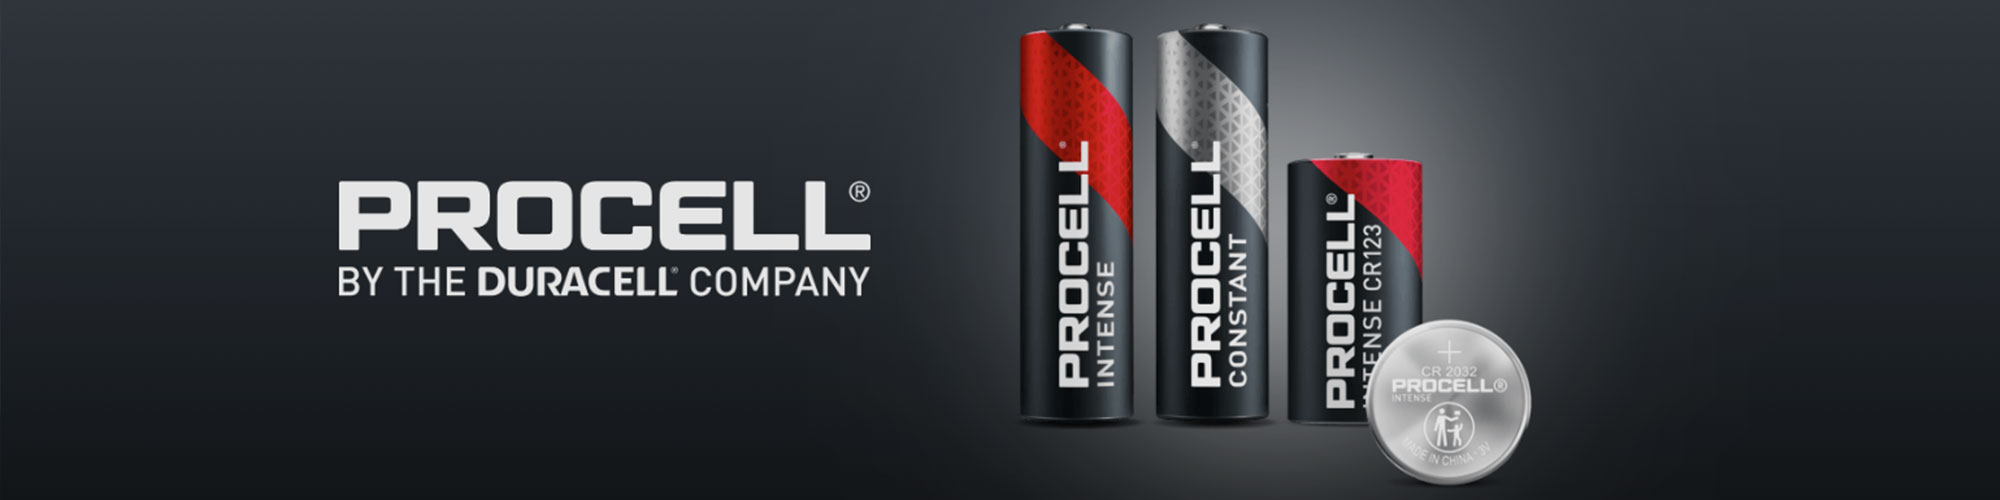 Procell Distributor | Electric Supply & Equipment